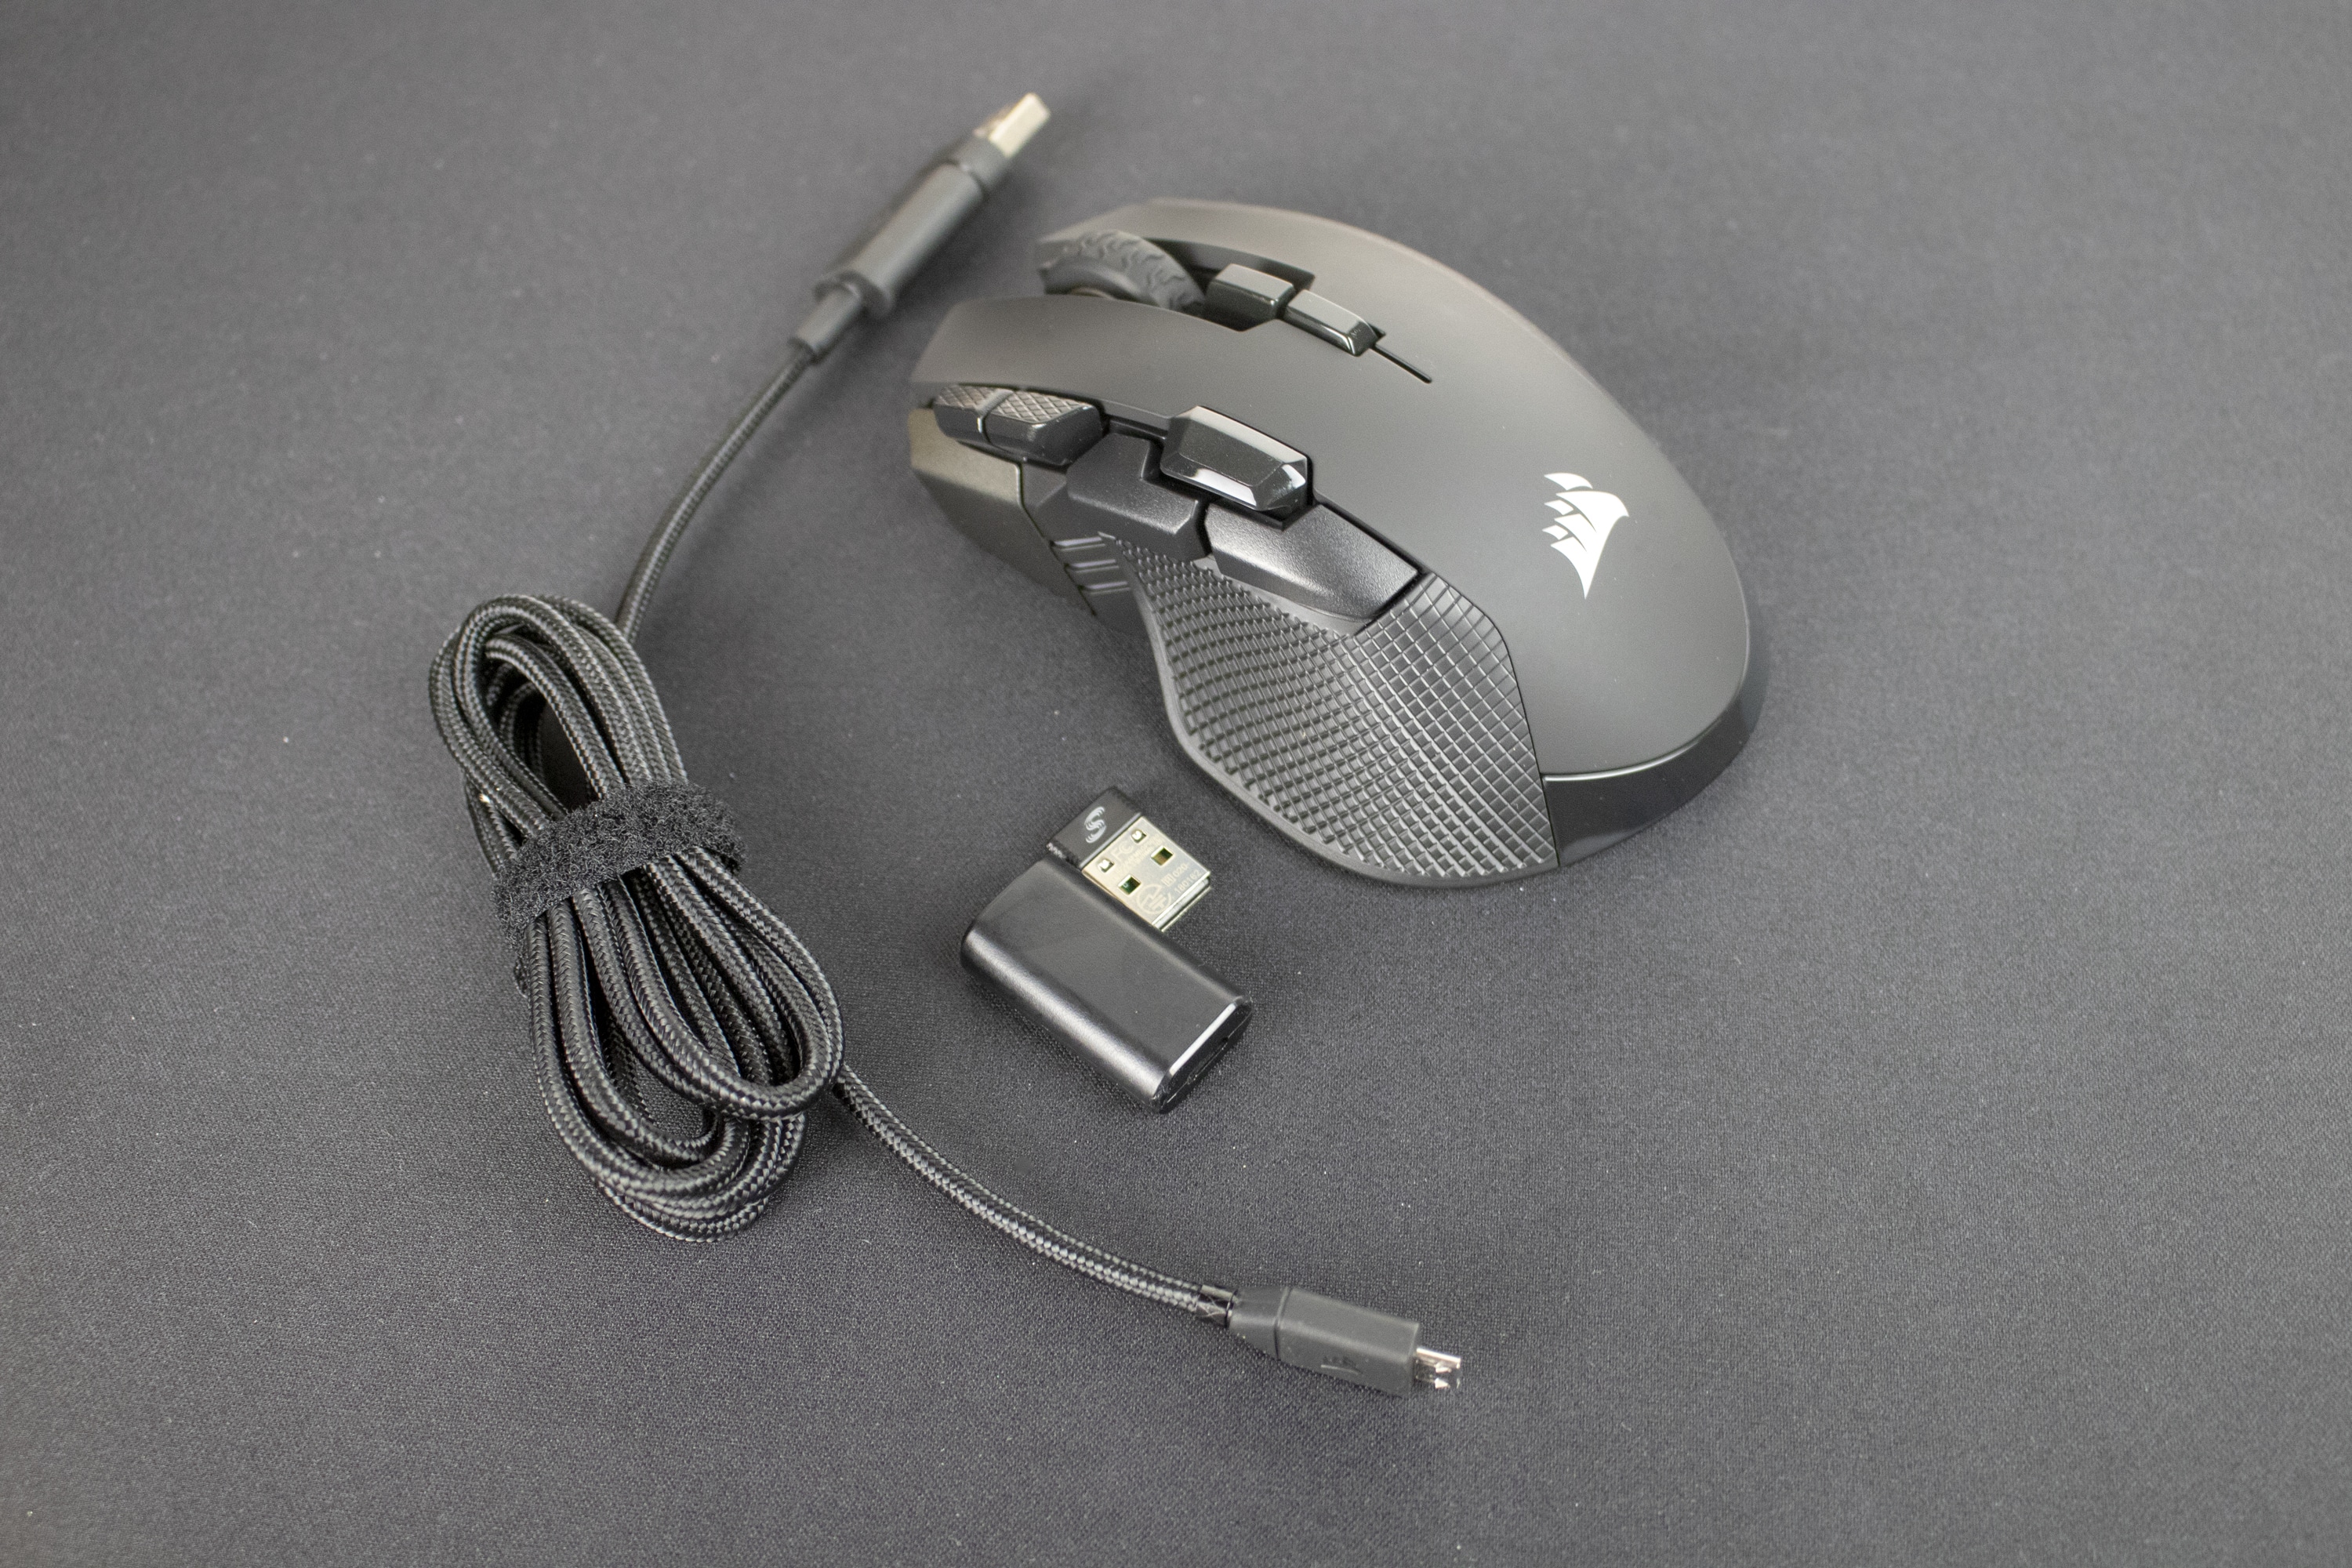 Dinkarville Dominante Alegre Corsair Ironclaw RGB Wireless Gaming Mouse Review